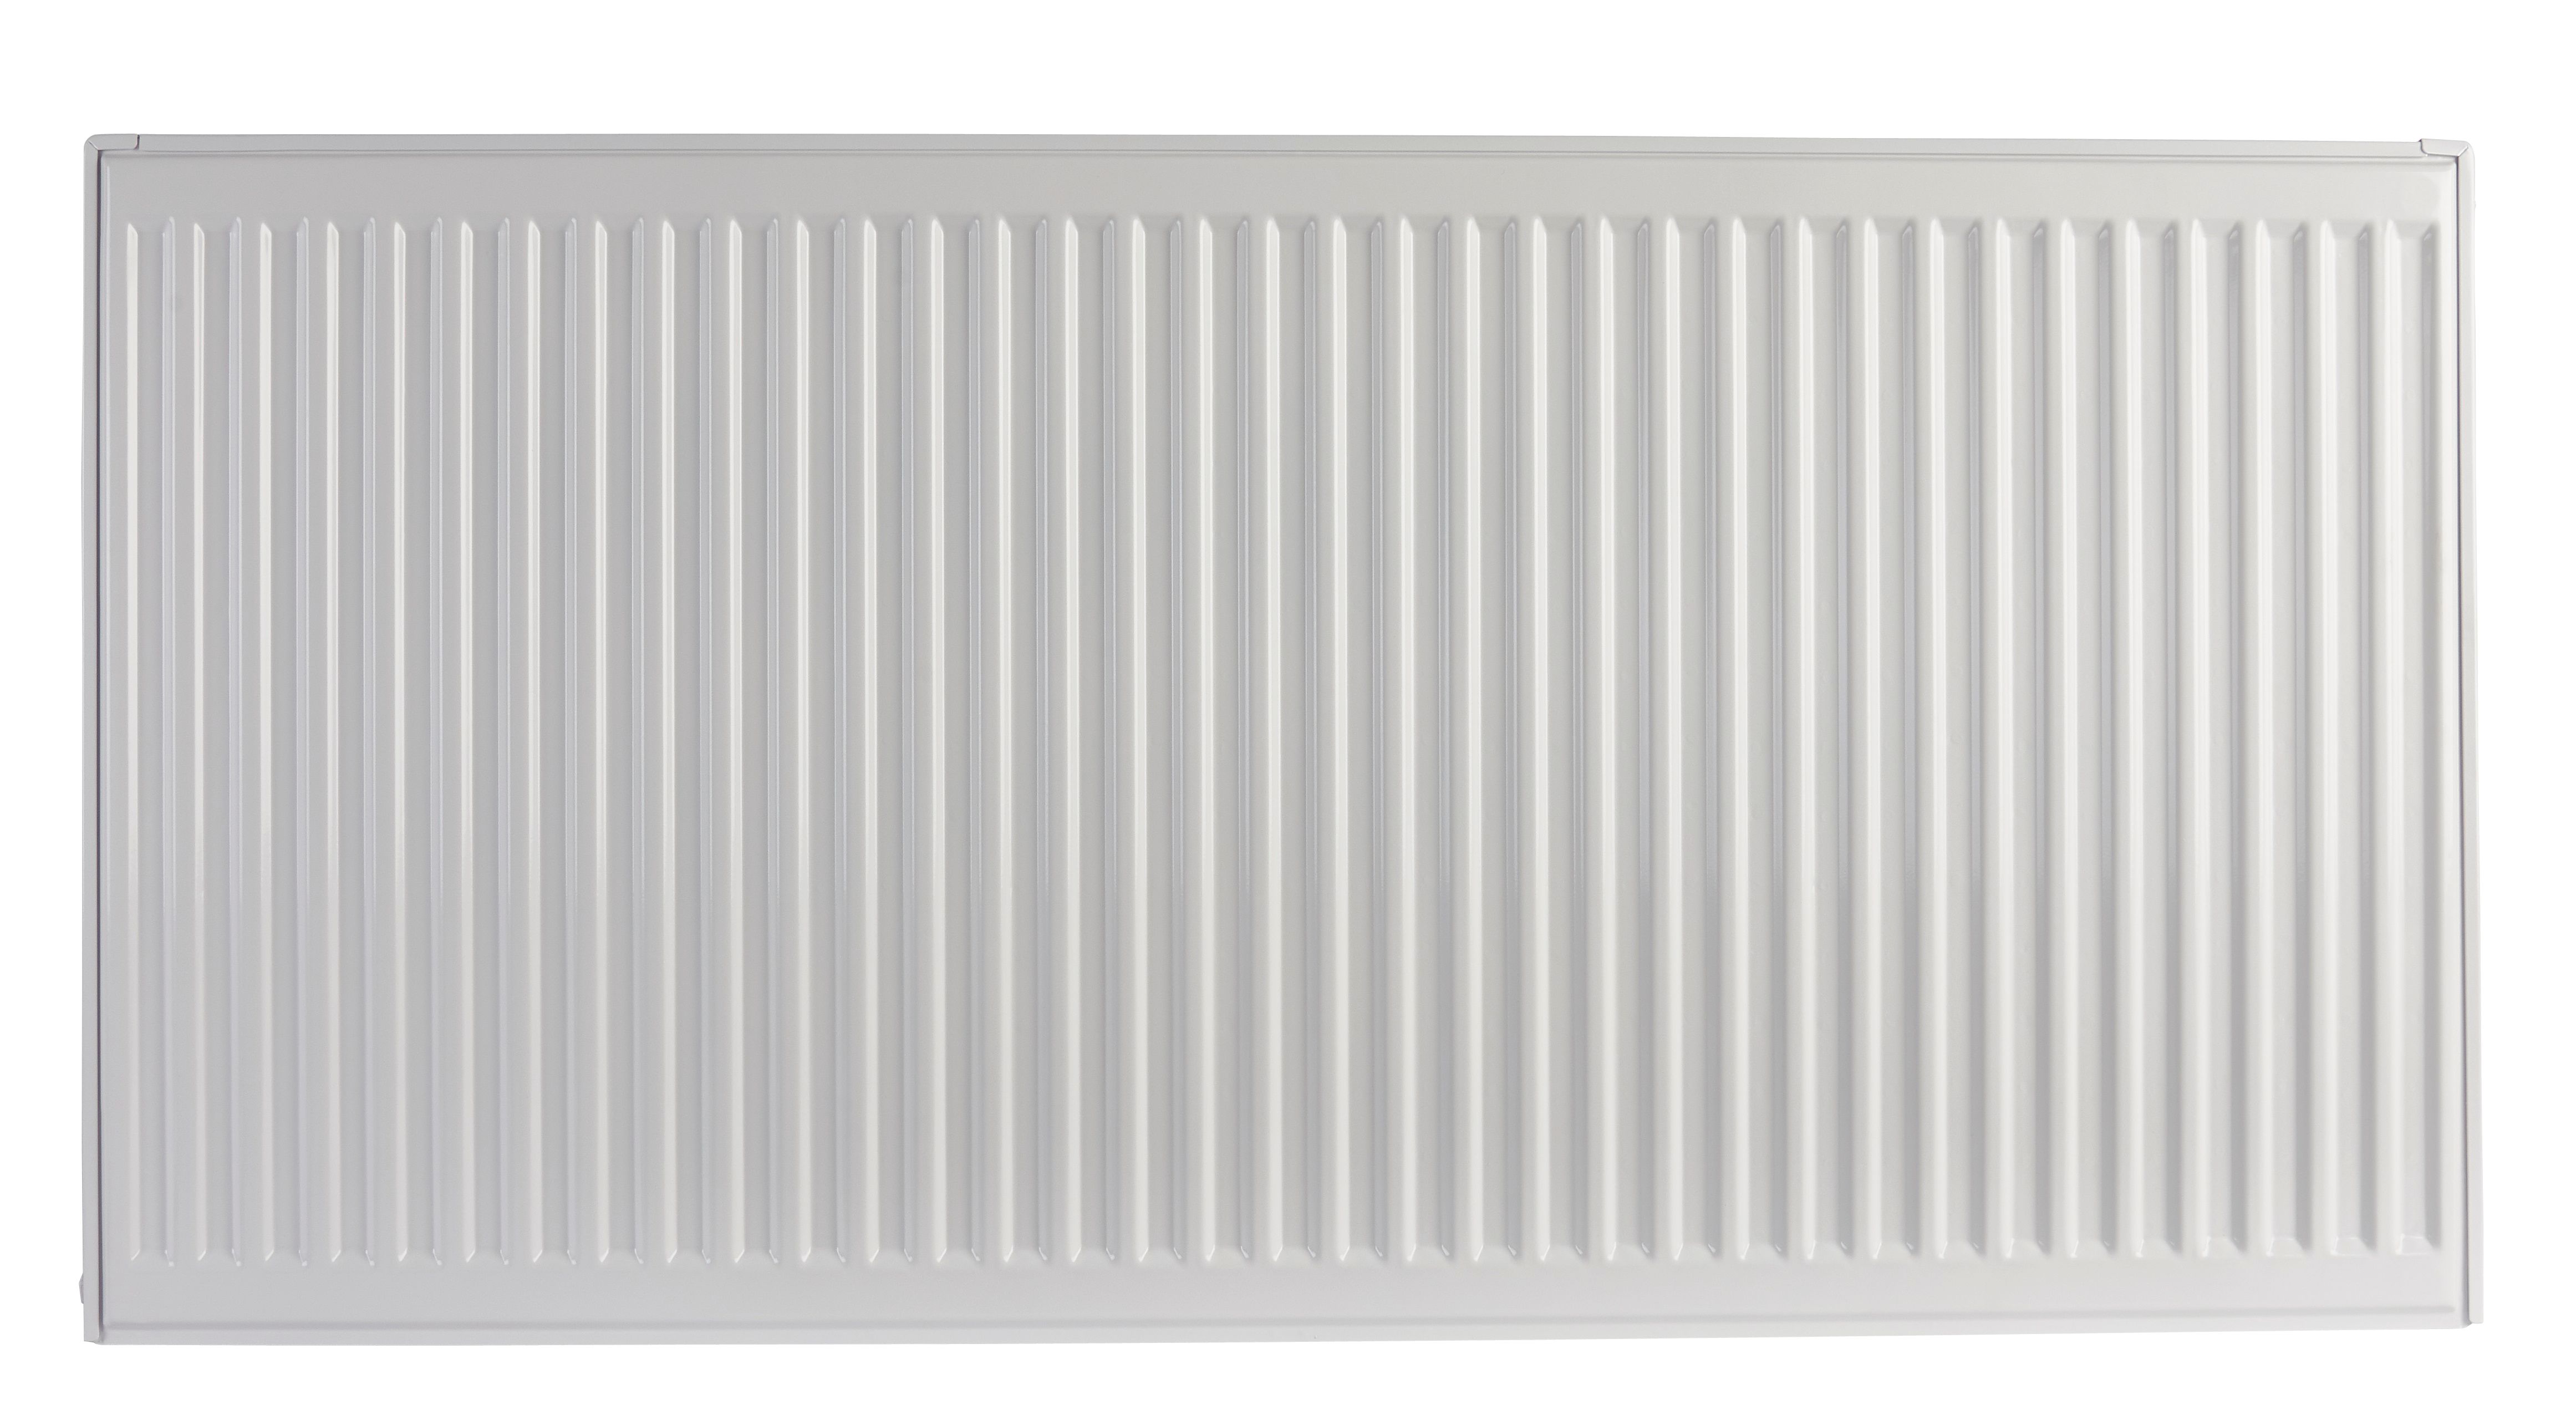 Homeline by Stelrad 500 x 700mm Type 21 Double Panel Plus Single Convector Radiator